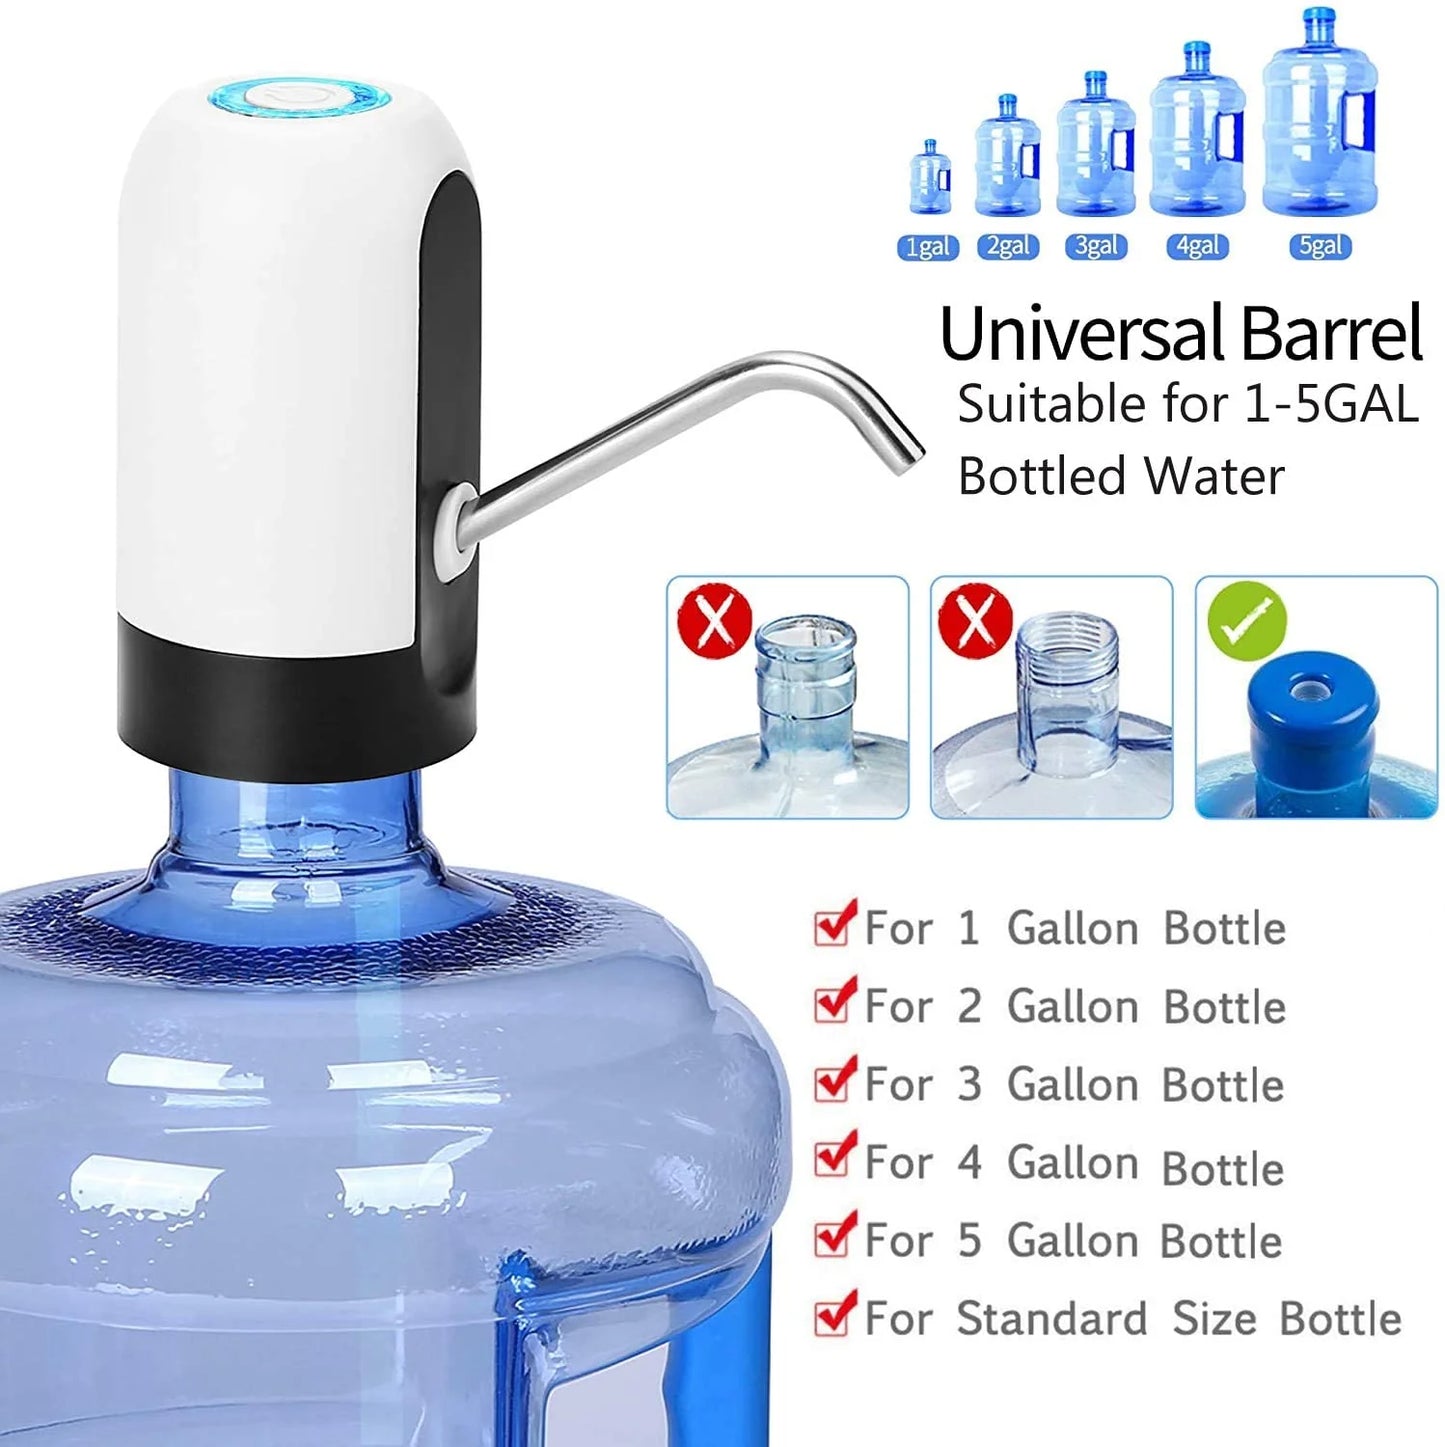 PORTABLE AUTOMATIC RECHARGEABLE USB WATER DISPENSER PUMP